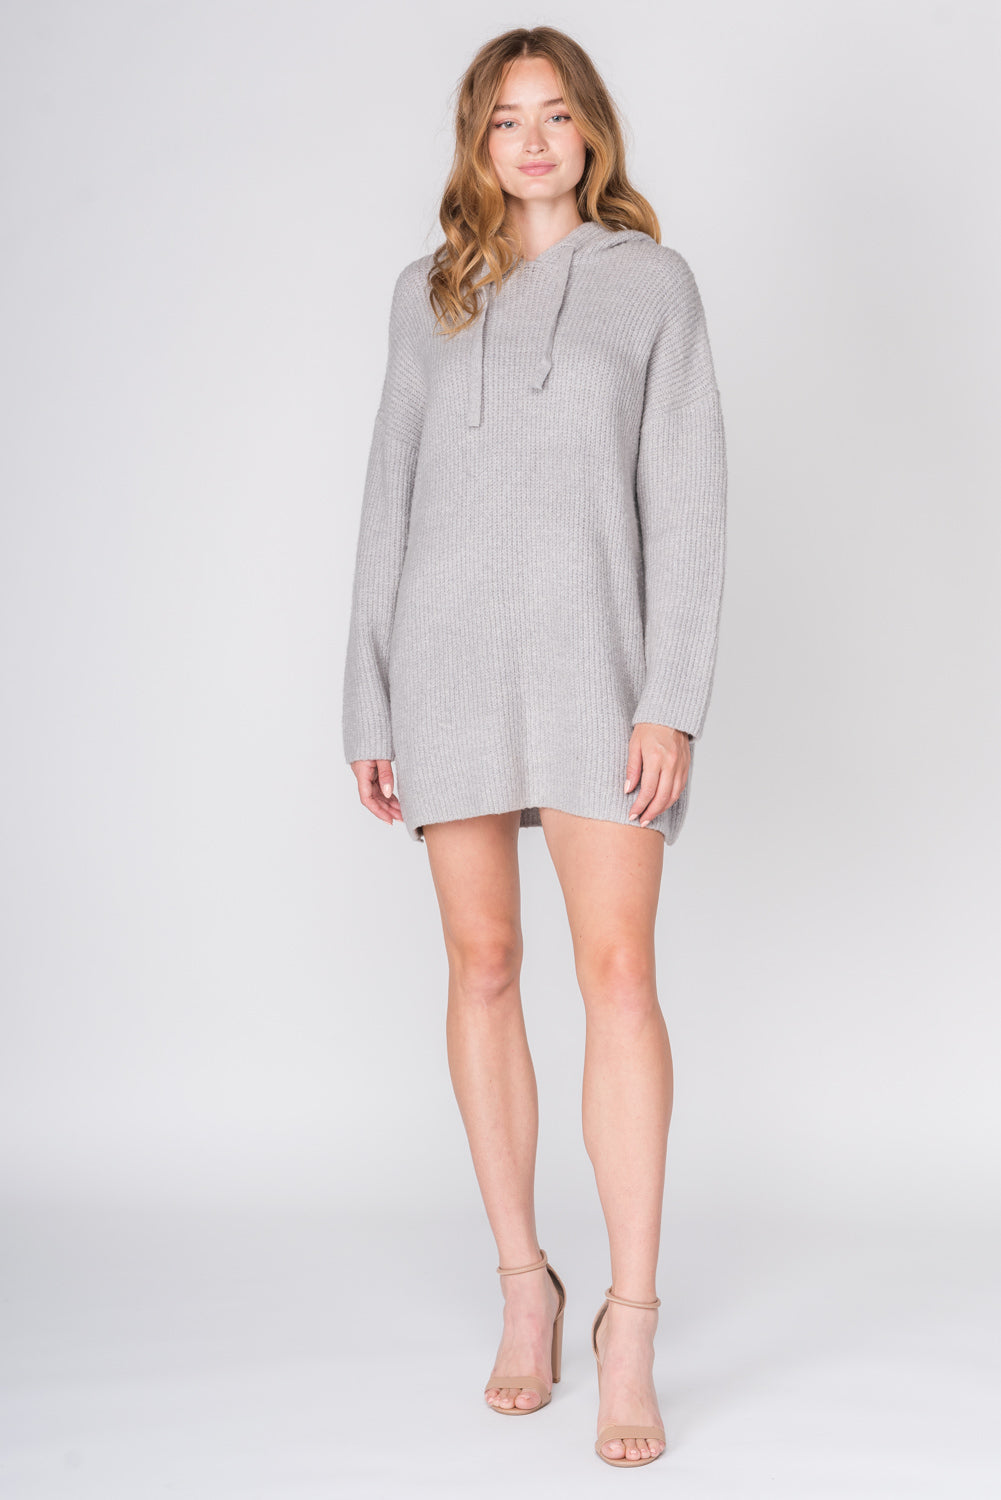 This $35 Oversized Sweater Dress Has 3,700+ 5-Star  Reviews